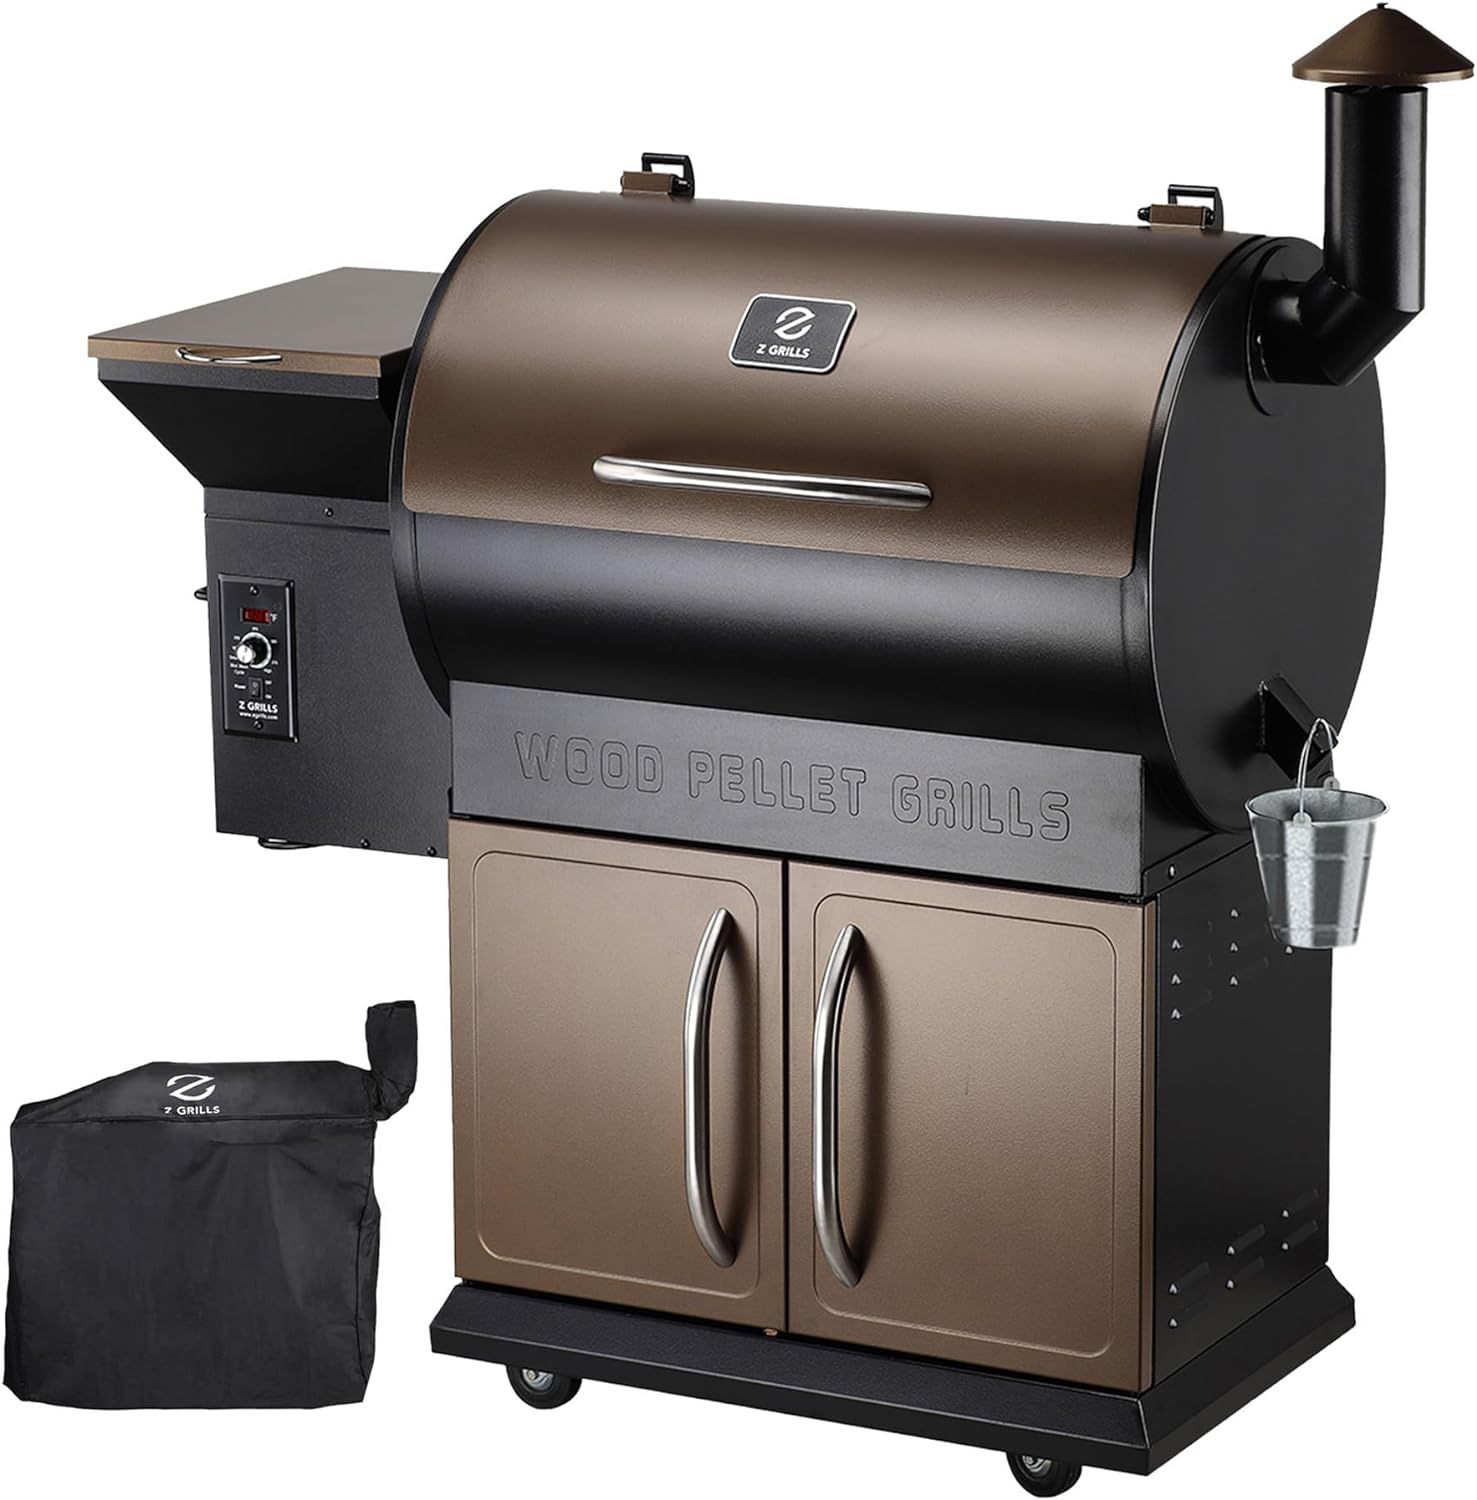 Z GRILLS Wood Pellet Grill Smoker with PID Control, Rain Cover, 700 sq. in Cooking Area for Outdoor BBQ, Smoke, Bake and Roast, 700D